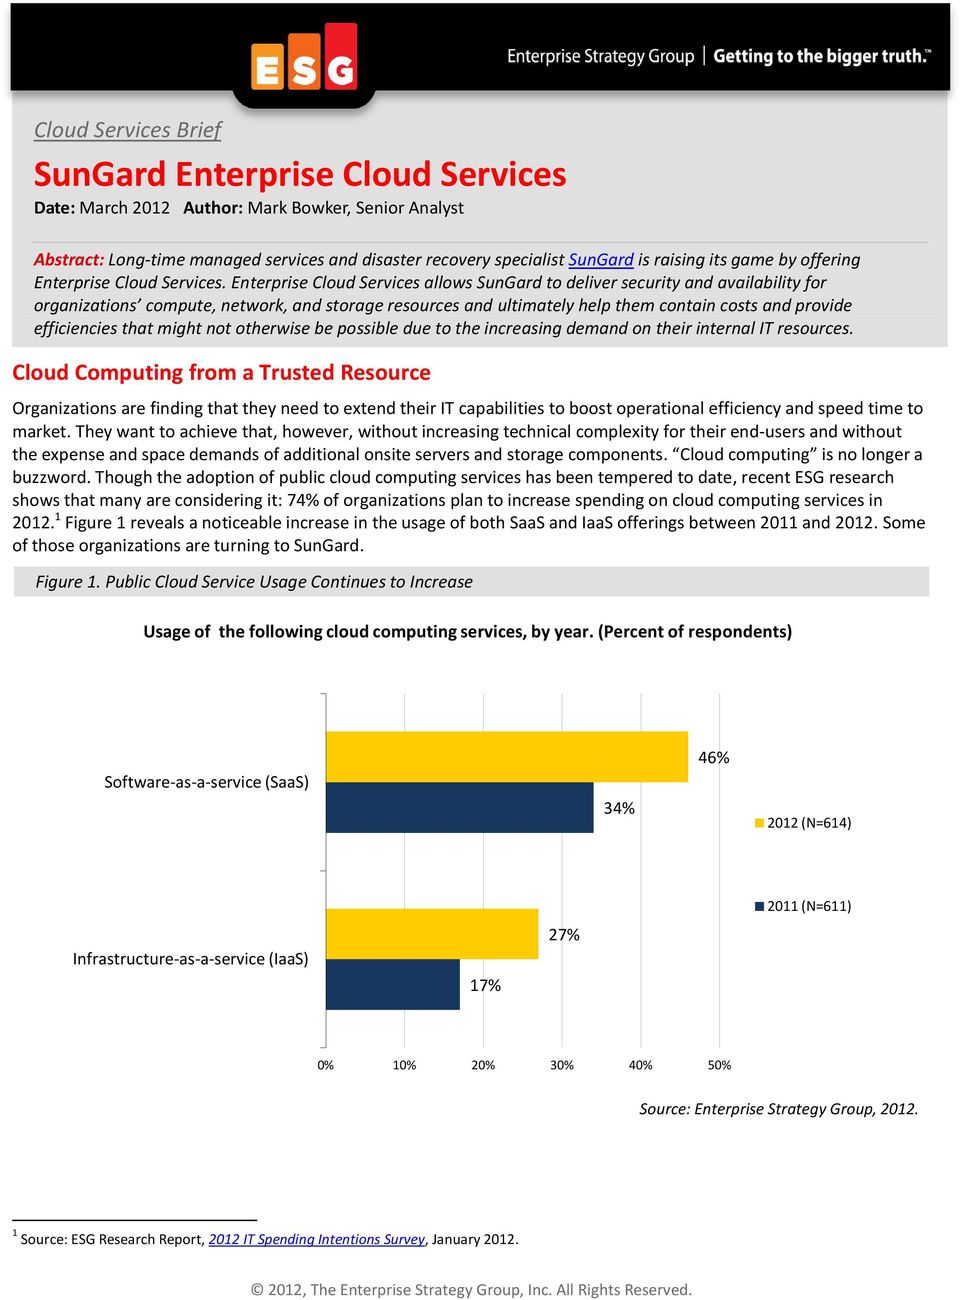 Enterprise Cloud Services allows SunGard to deliver security and availability for organizations compute, network, and storage resources and ultimately help them contain costs and provide efficiencies